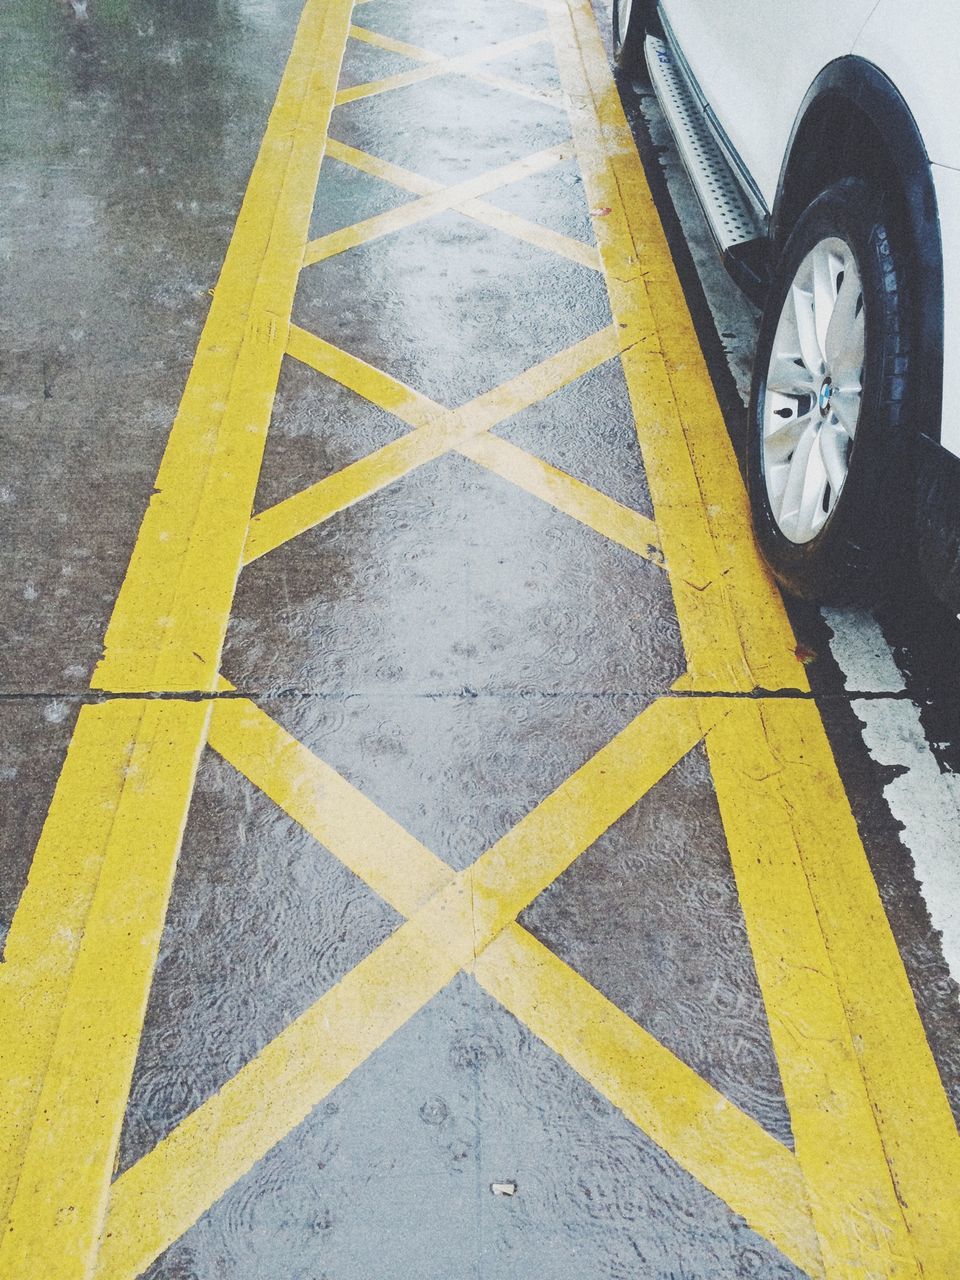 yellow, transportation, road marking, street, high angle view, asphalt, road, guidance, outdoors, day, arrow symbol, no people, mode of transport, close-up, direction, pattern, pavement, sign, the way forward, geometric shape